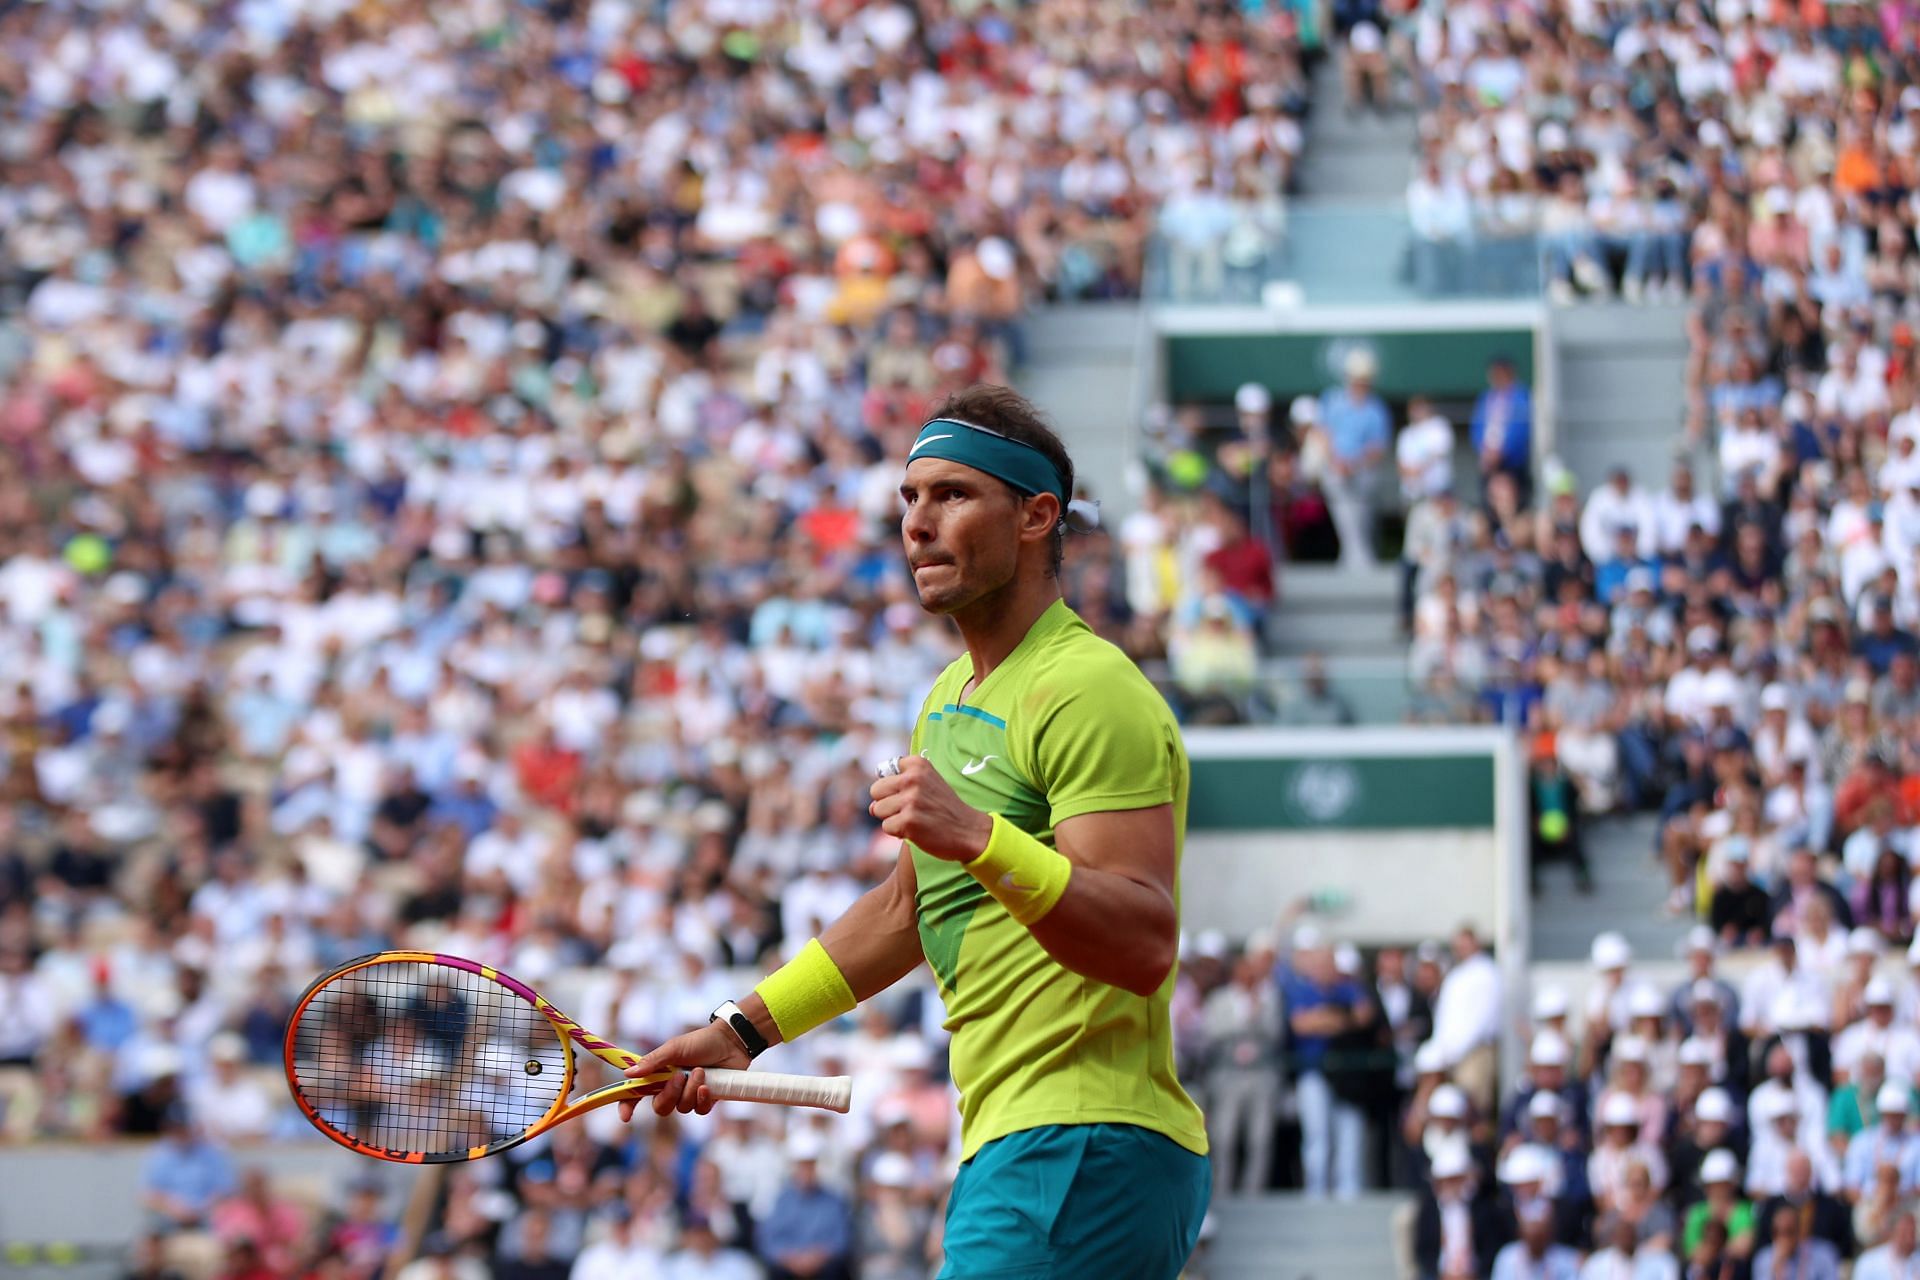 Nadal takes on Felix Auger-Aliassime in the fourth round of the French Open